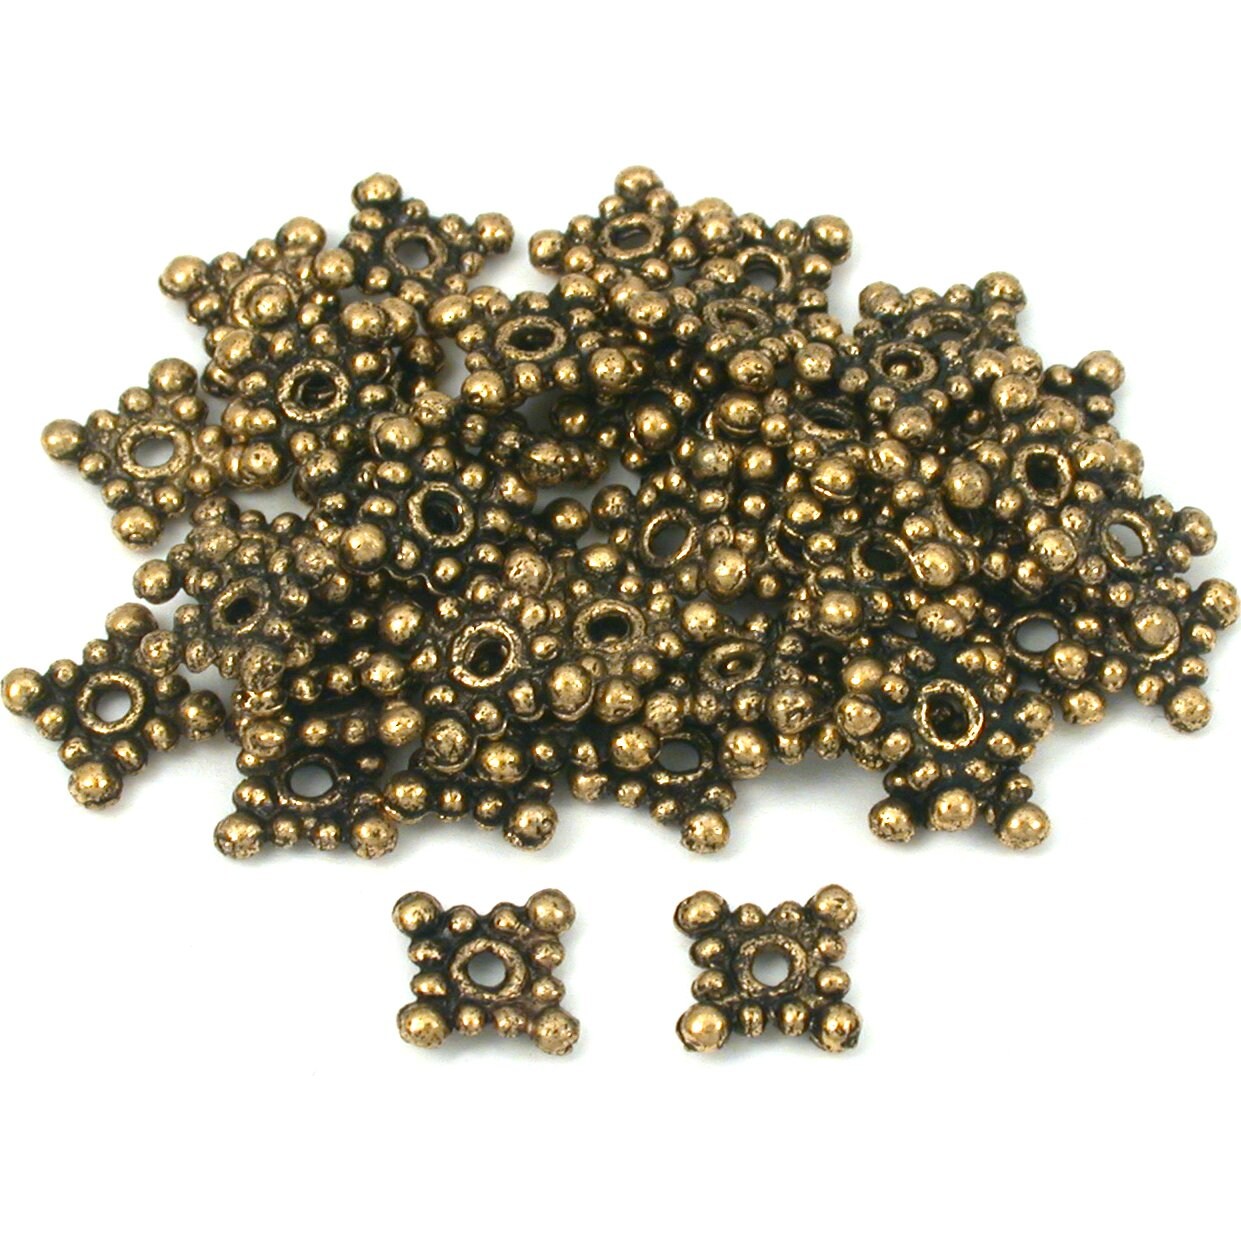 Square Bali Spacer Beads Antique Gold Plt 8mm Approx 50